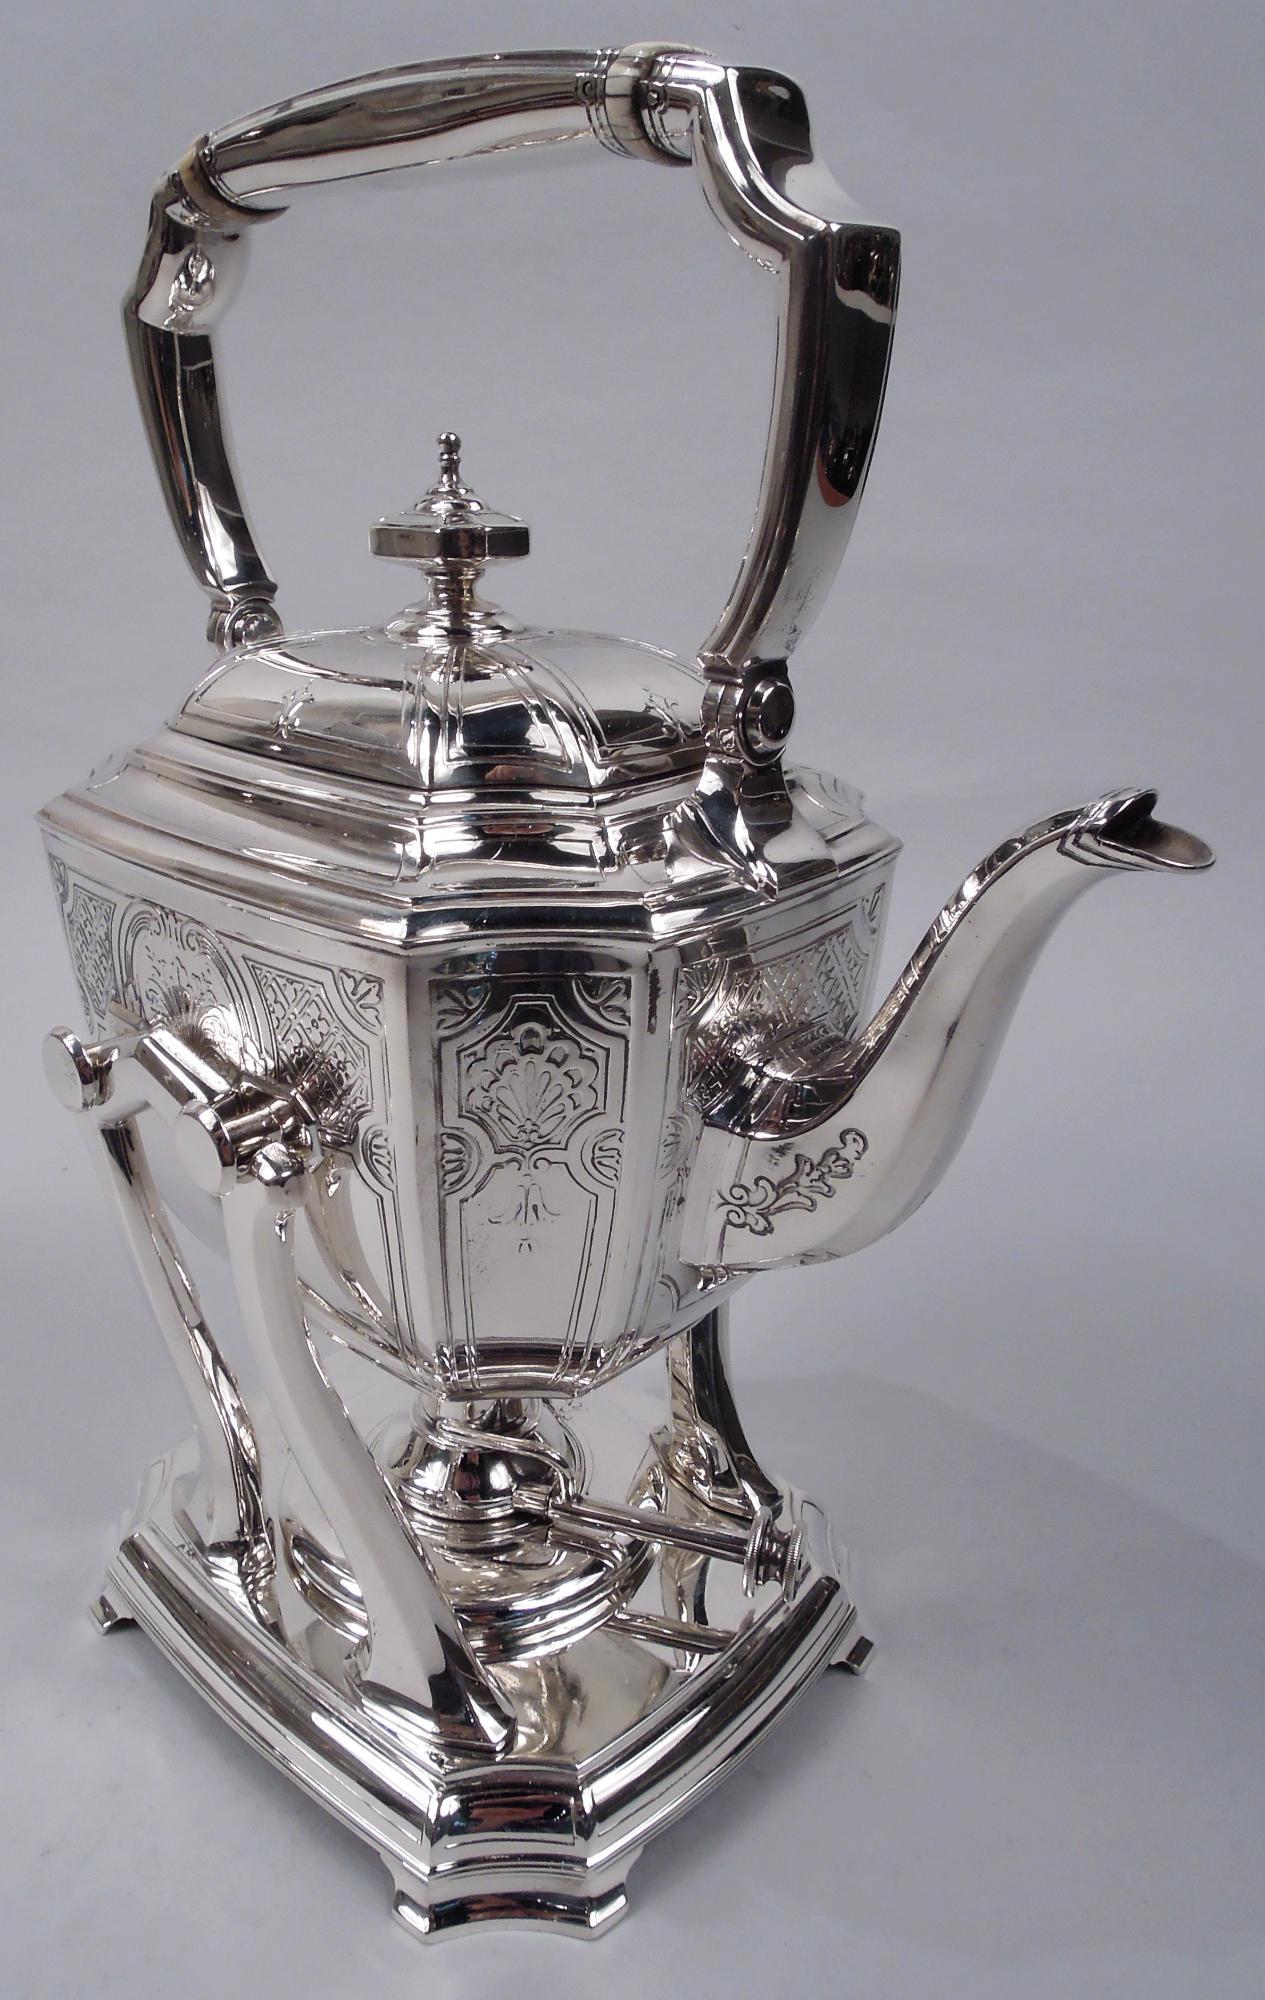 Engraved Hampton sterling silver hot water kettle on stand. Made by Tiffany & Co. in New York, ca 1912. Kettle curved and rectilinear with concave corners faceted s-scroll handle, and swing-mounted handle; cover domed and side-hinged with finial.